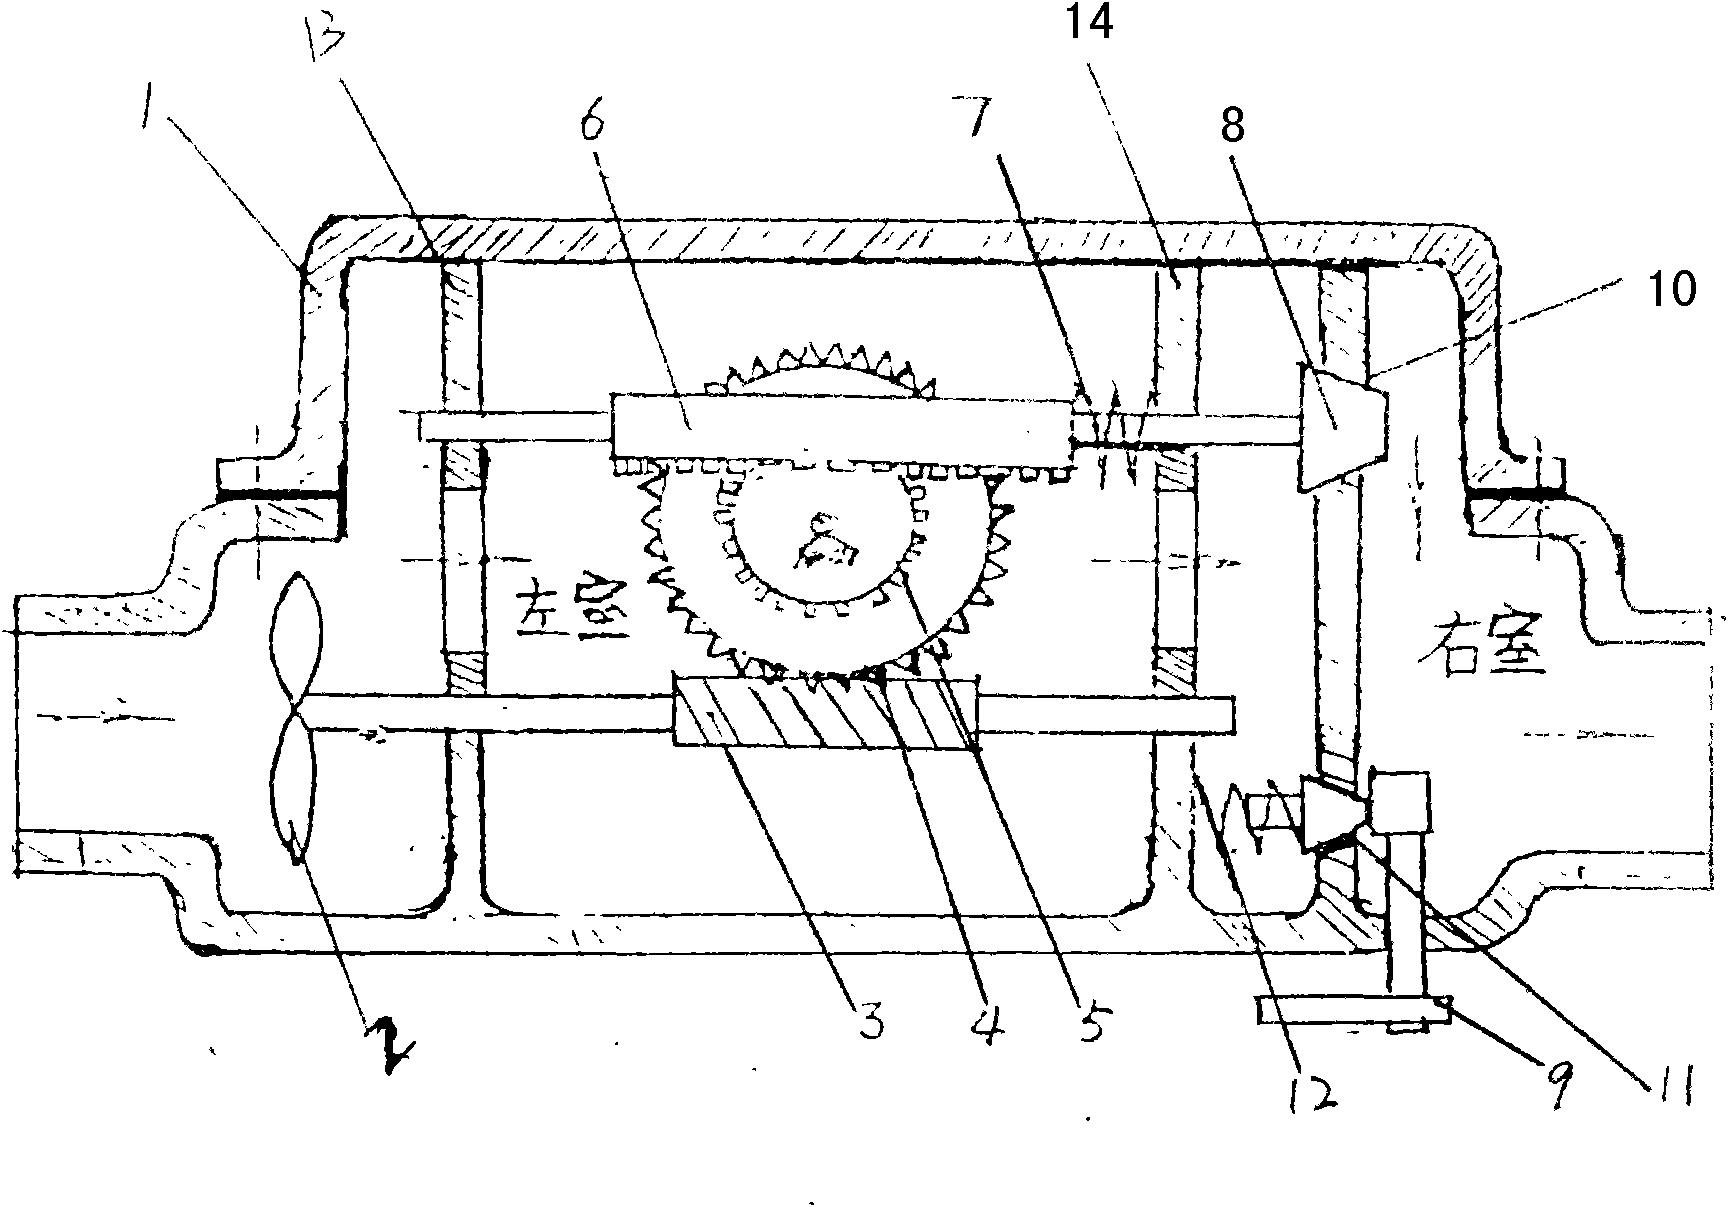 Self-controlled device for valve